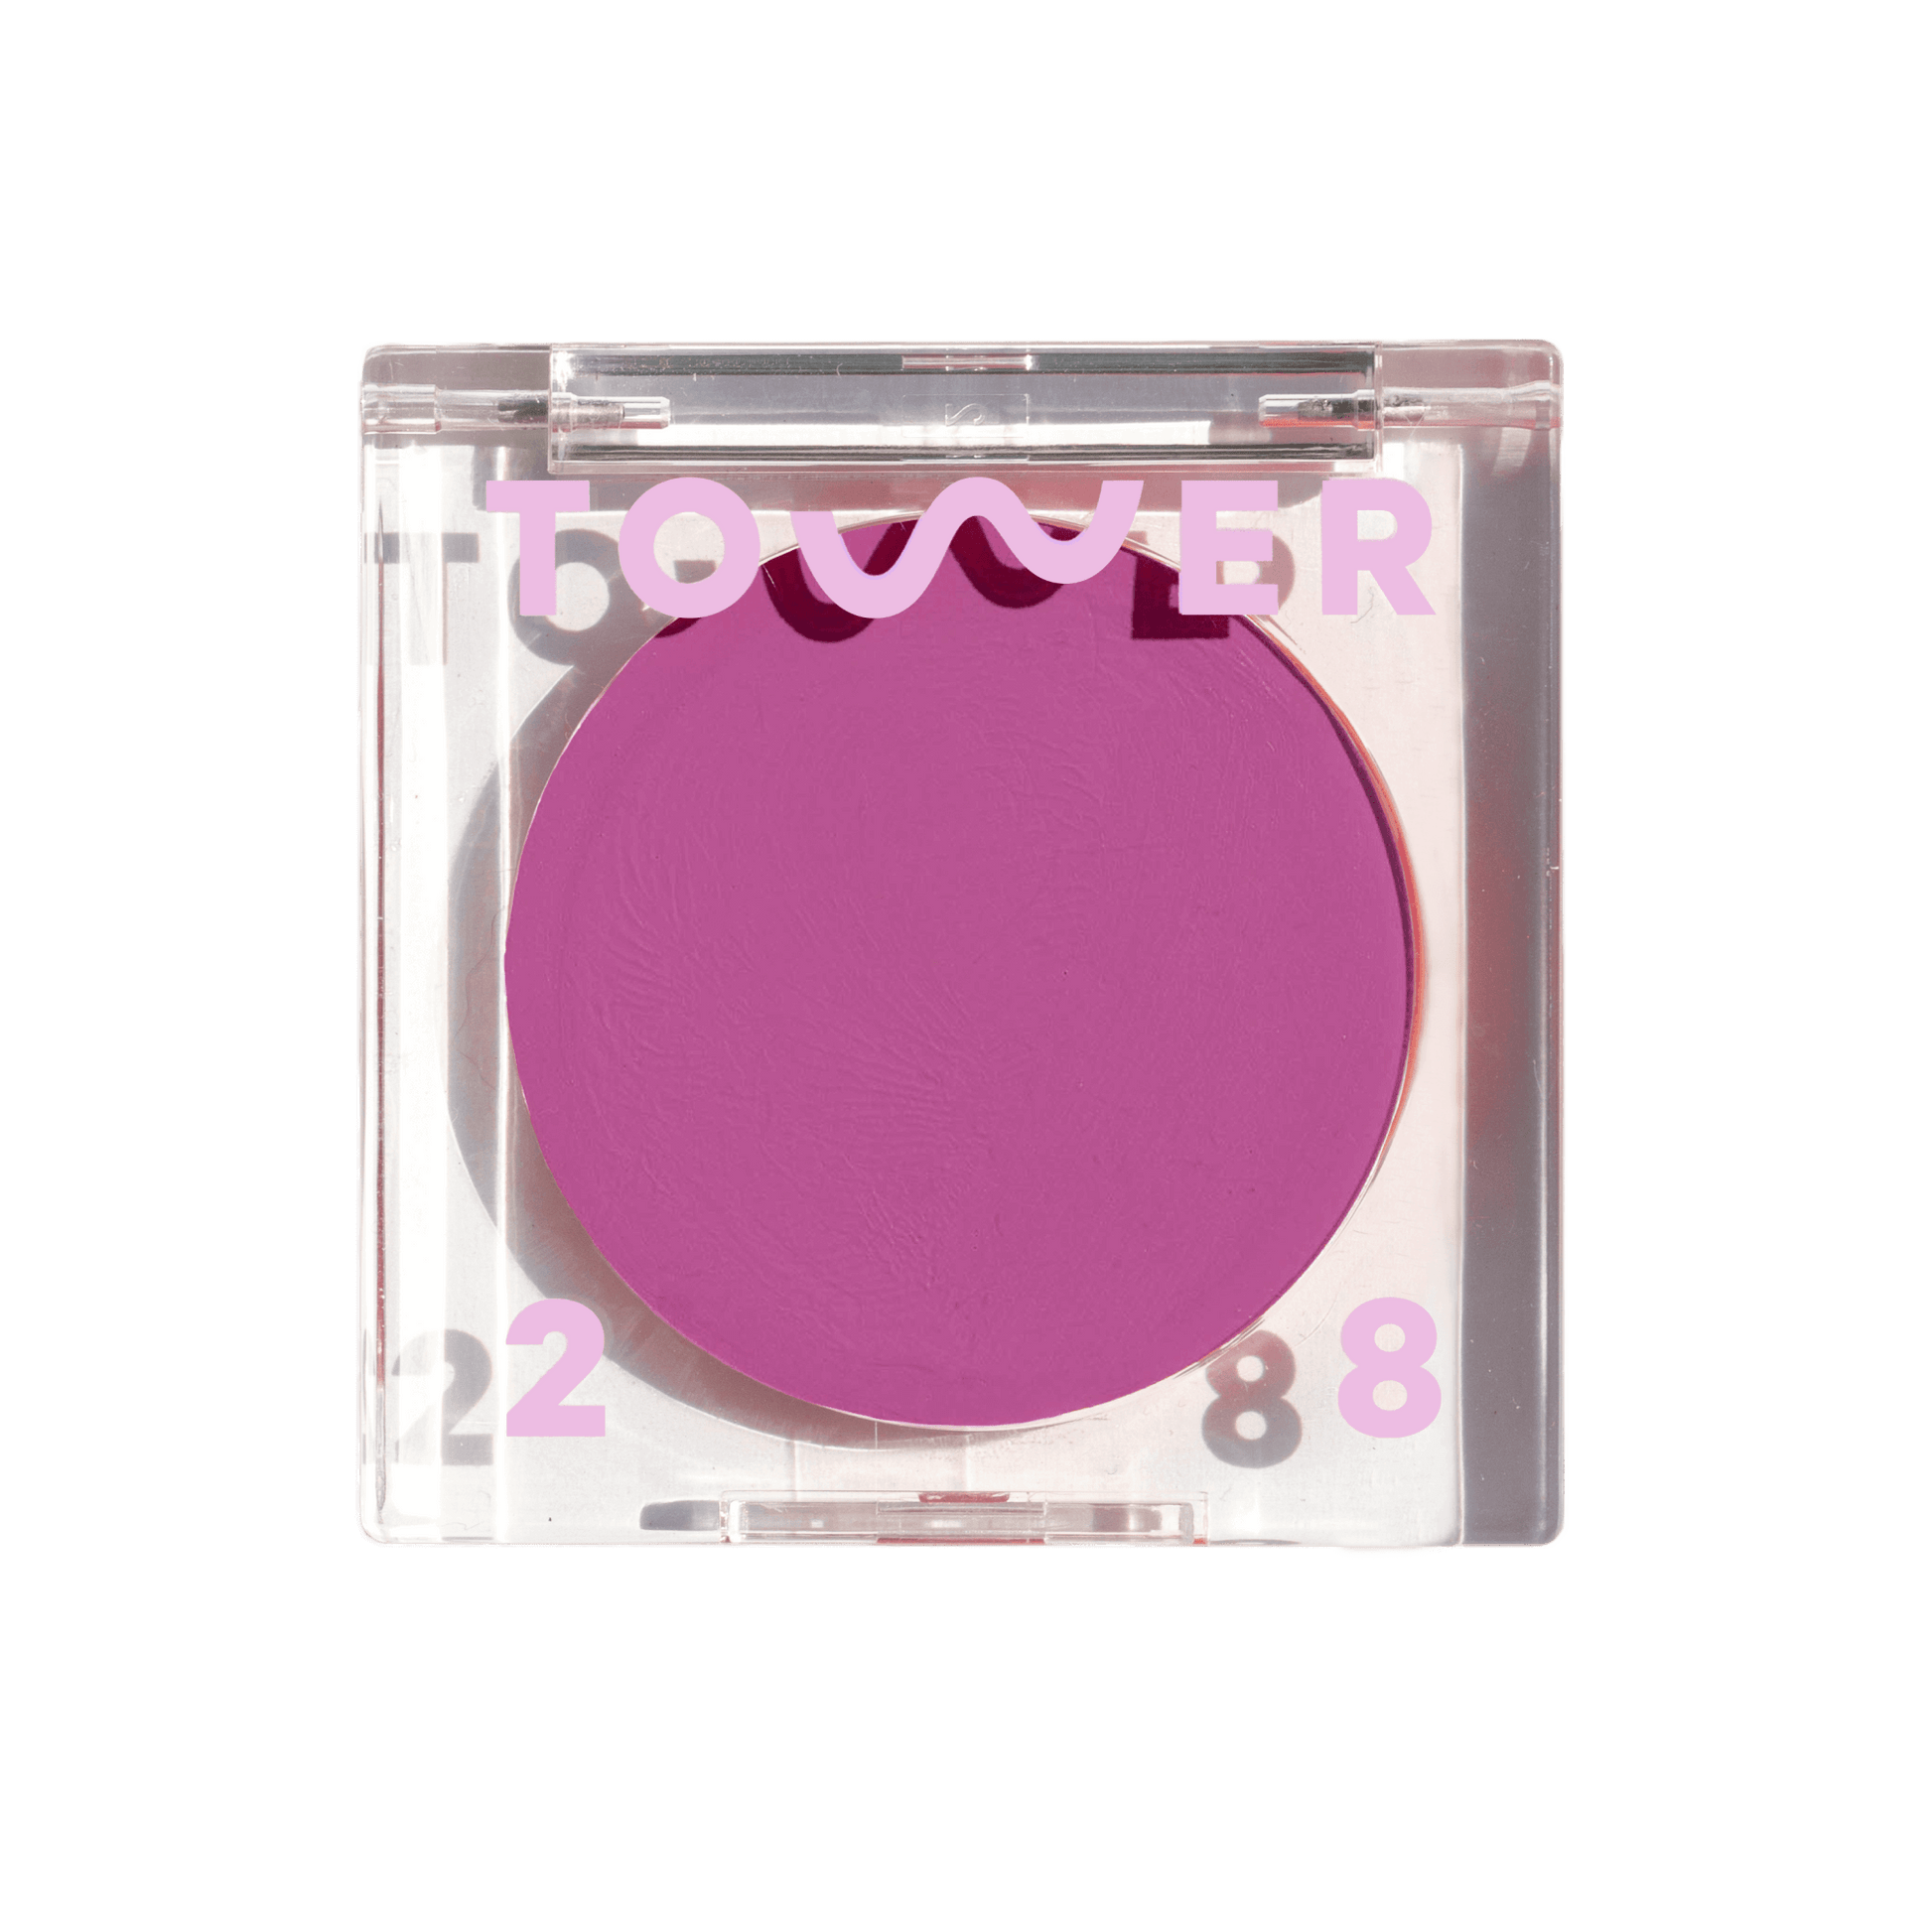 Tower 28 Beauty's BeachPlease Cream Blush in the shade Party Hour